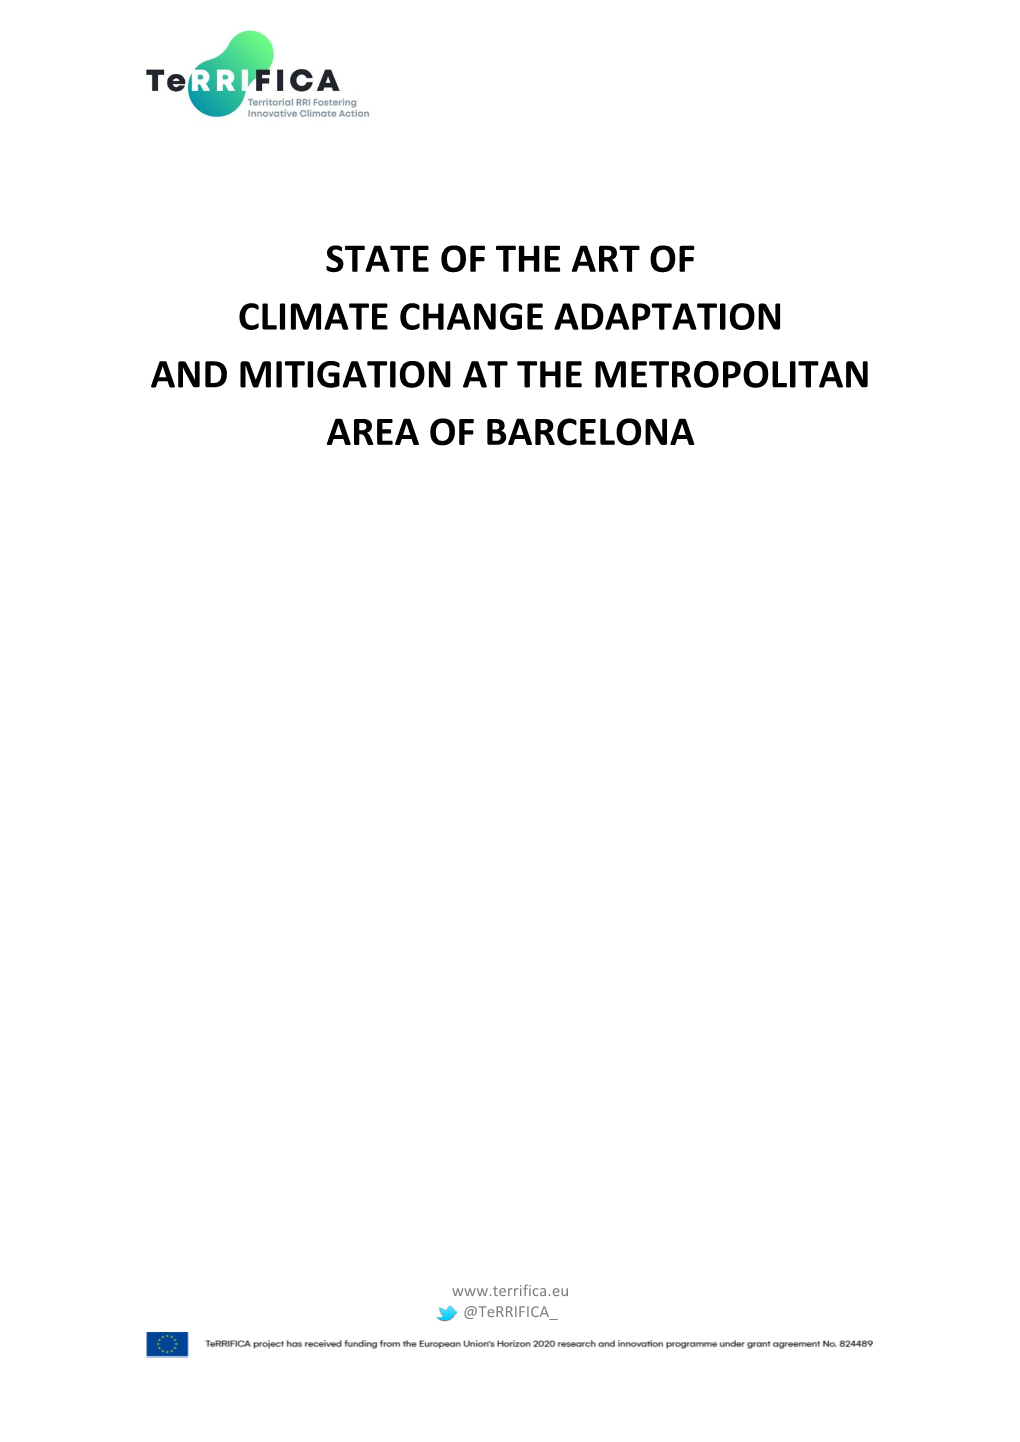 State of the Art of Climate Change Adaptation and Mitigation at the Metropolitan Area of Barcelona